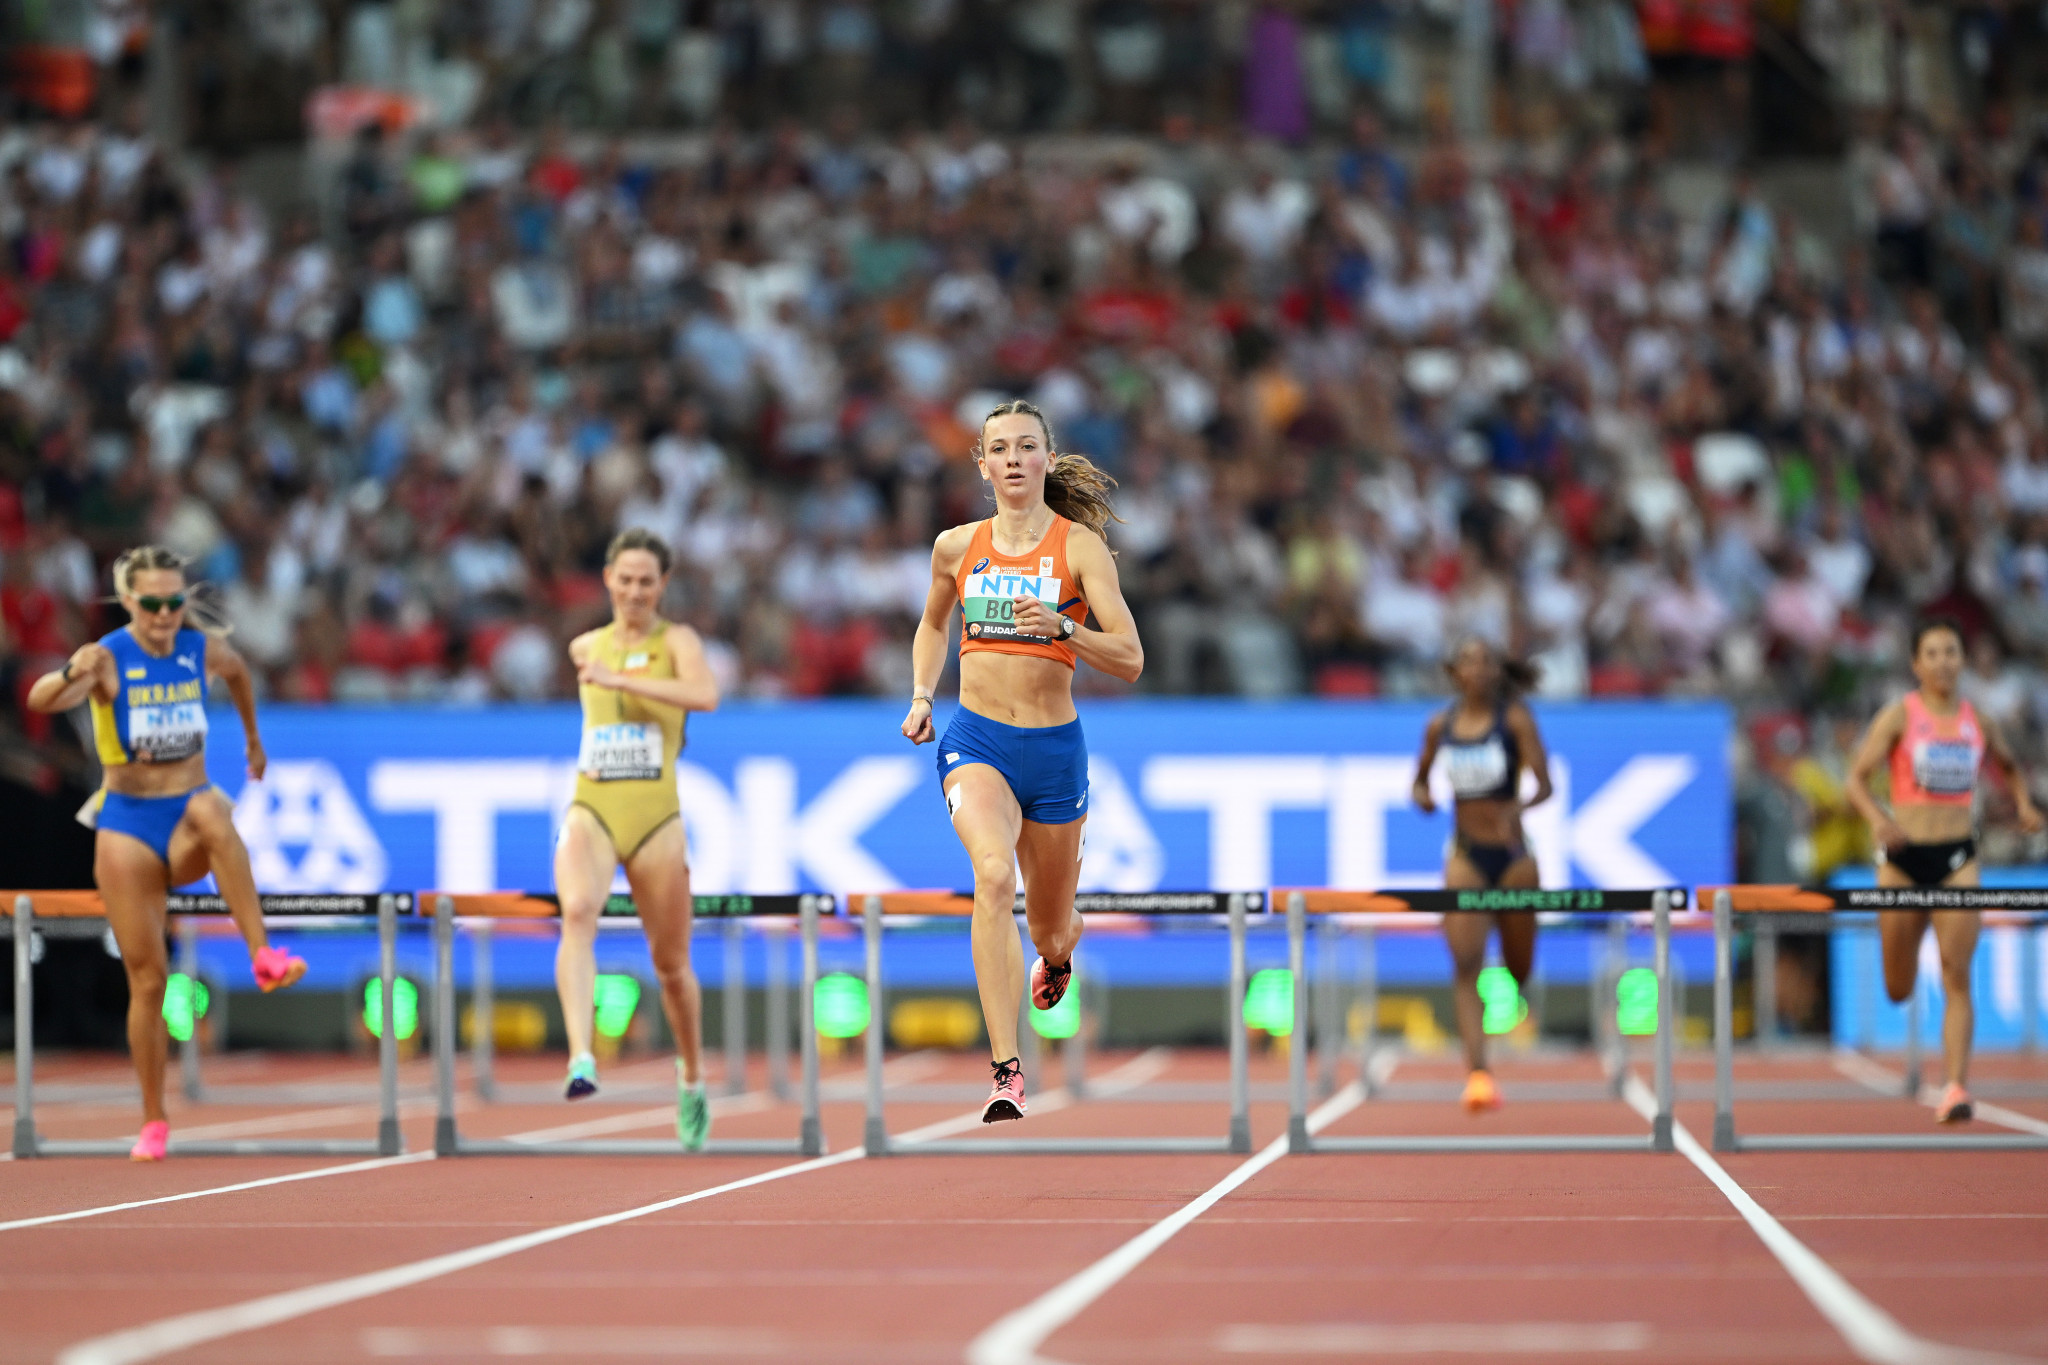 Femke Bol of The Netherlands, centre, overcame the disappointment of stumbling in the closing stages of the mixed 4x400m relay final by comfortably winning her women's 400m hurdles heat ©Getty Images